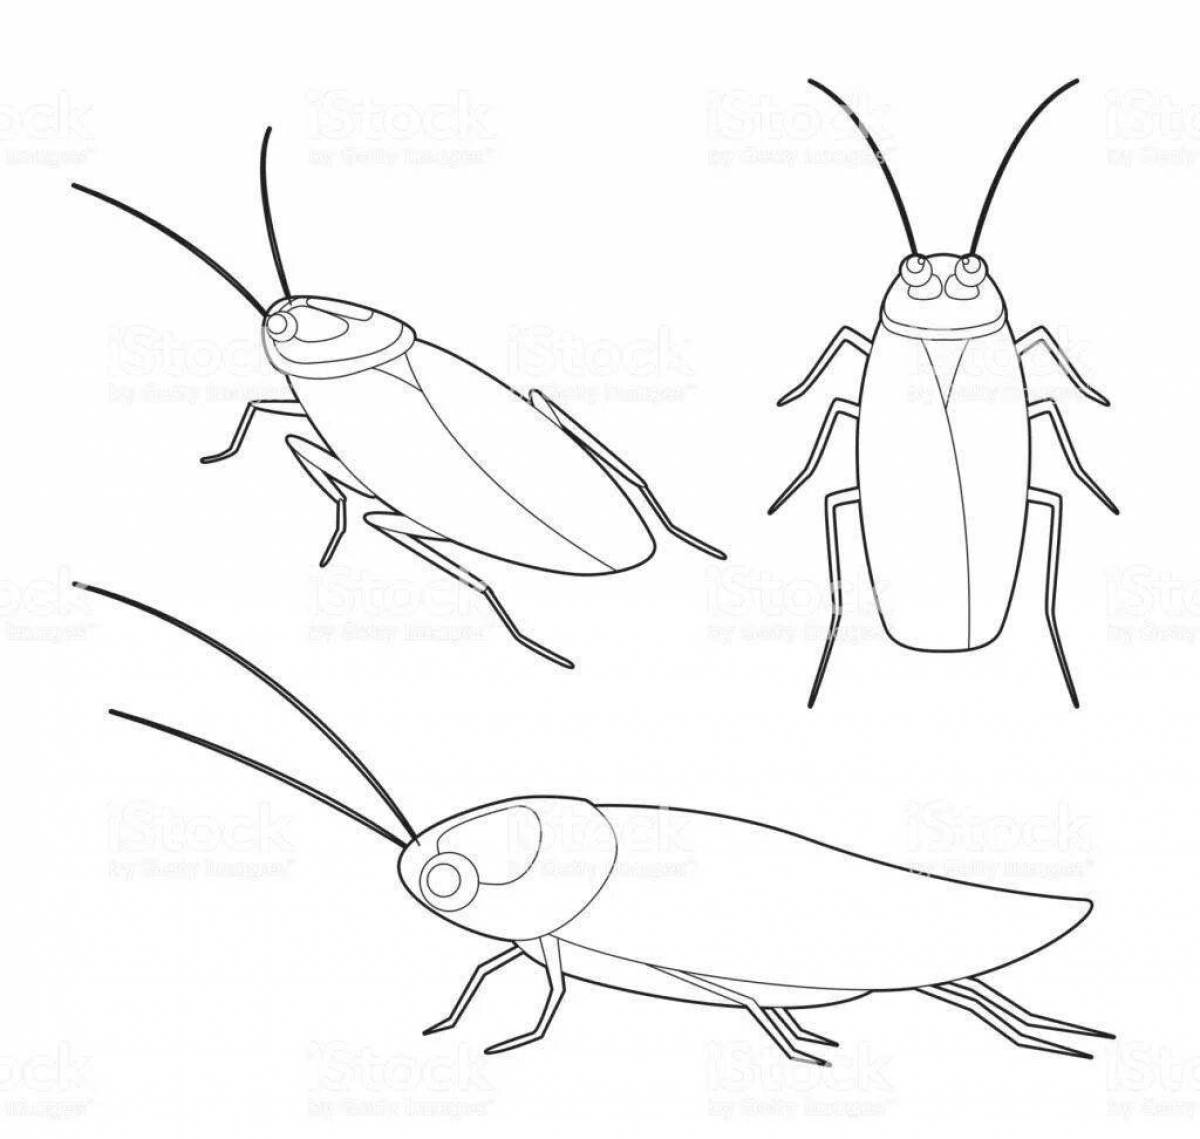 Fun cockroach coloring for kids